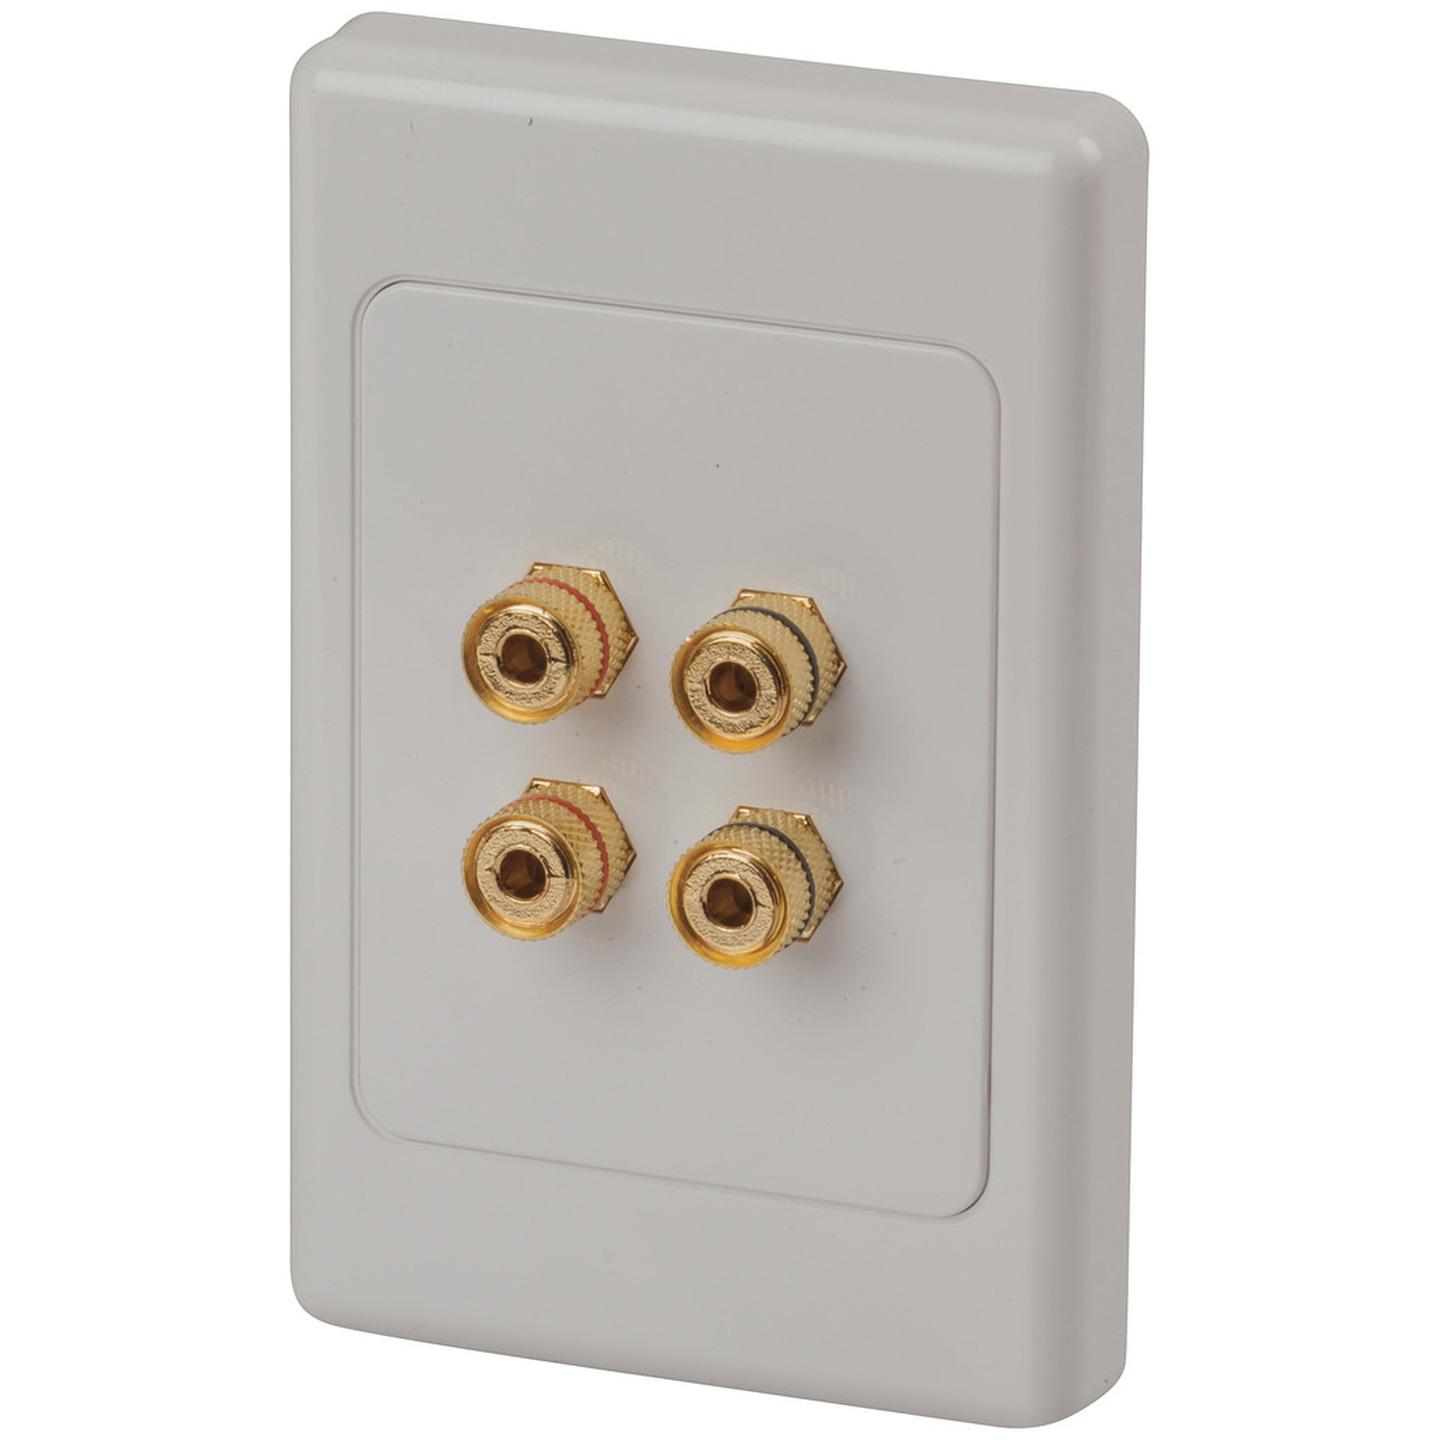 Gold Screw Terminals On Large Wallplate